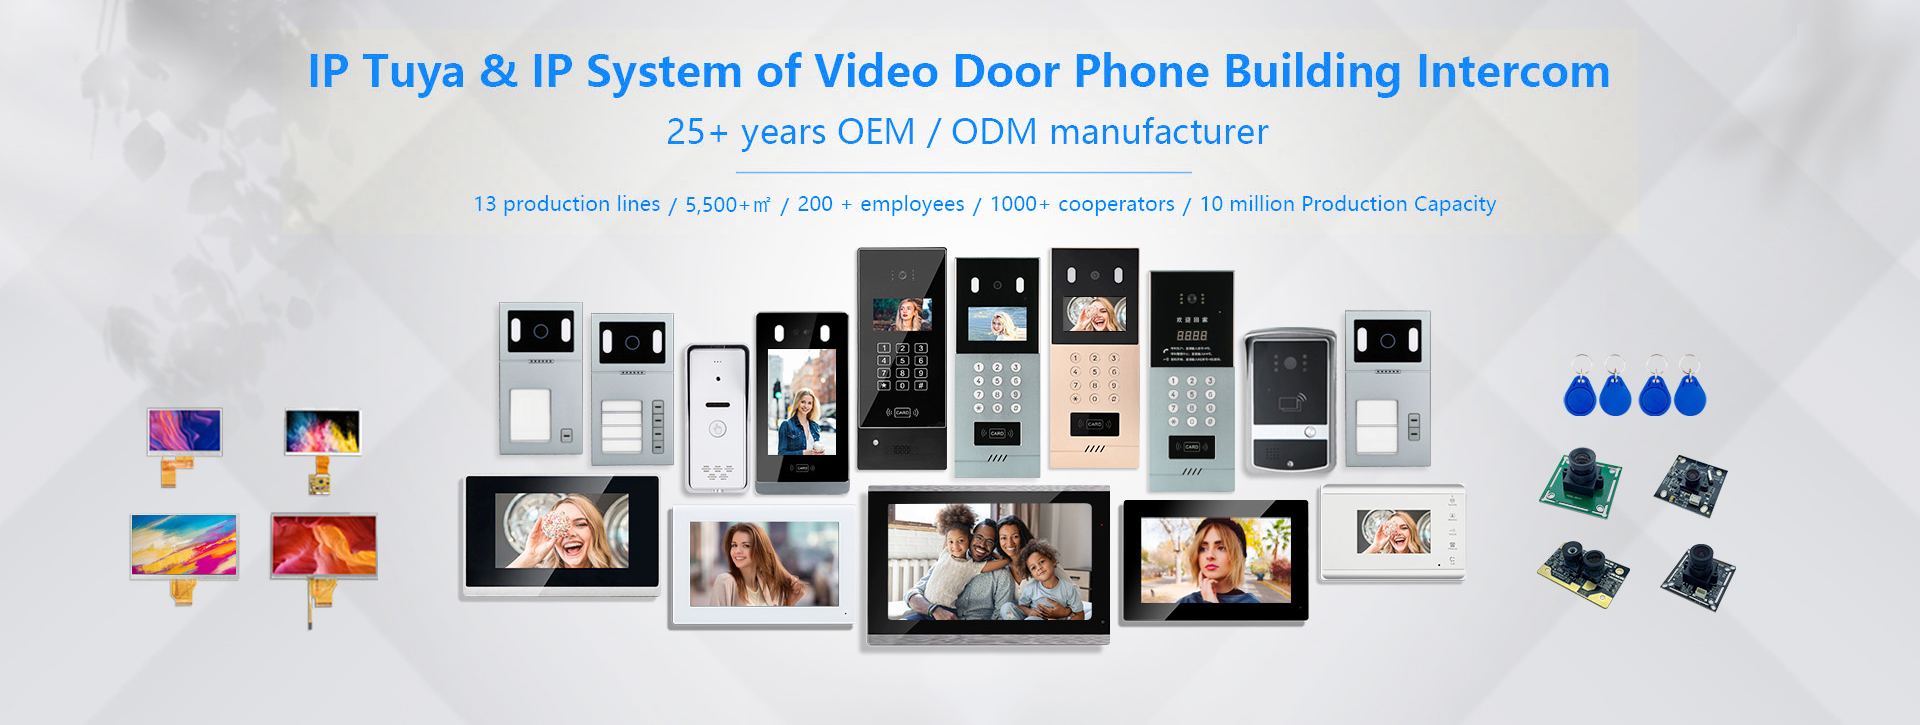 Video Doorbell, Touch Panel, Smart Chime - Skynex